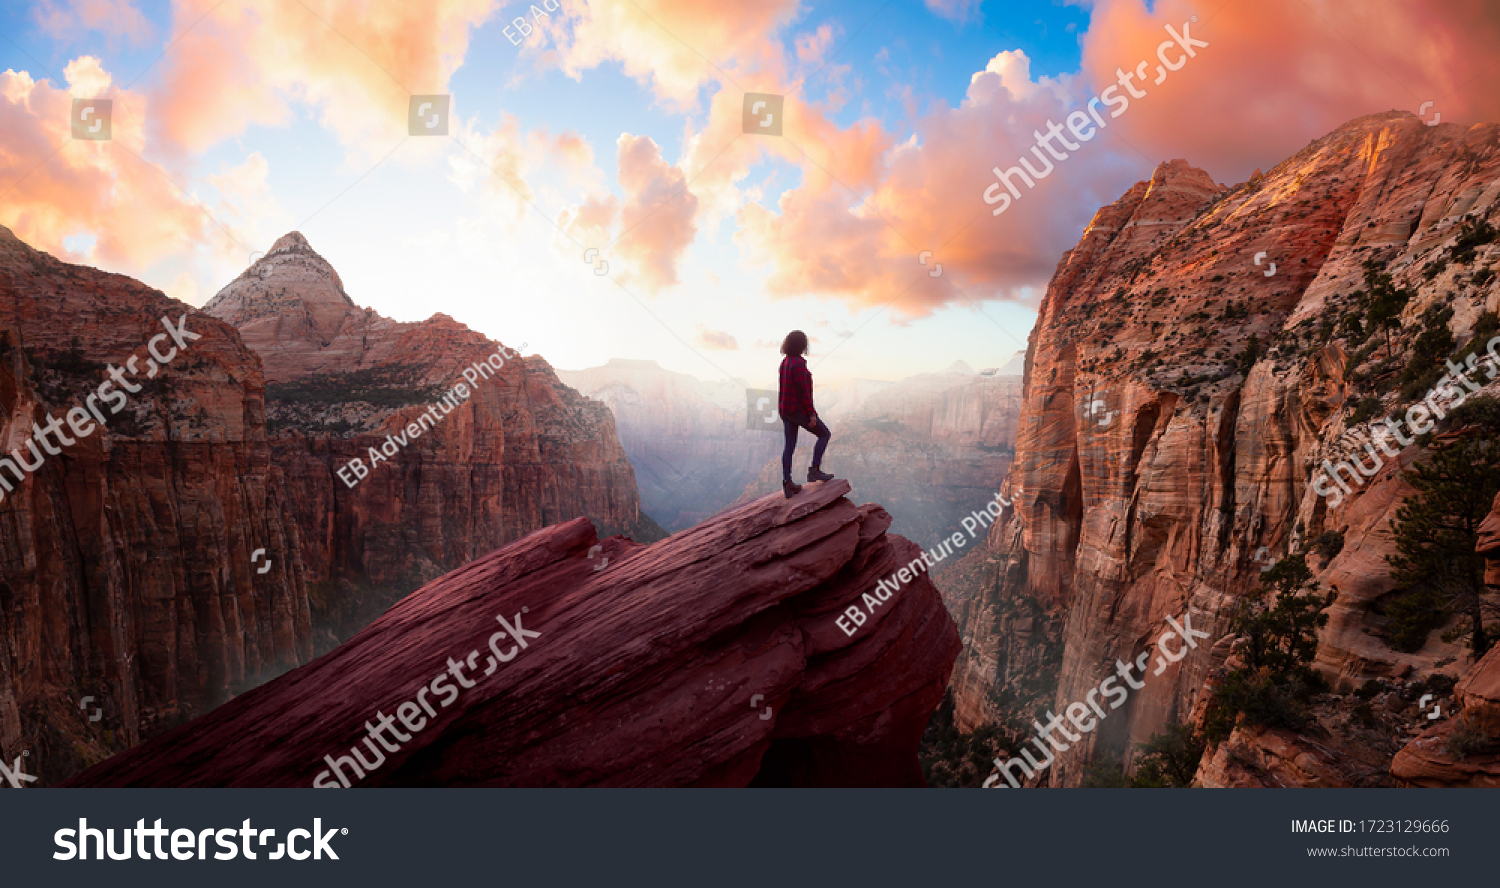 Adventurous Woman at the edge of a cliff is looking at a beautiful landscape view in the Canyon during a vibrant sunset. Taken in Zion National Park, Utah, United States. Sky Composite Panorama #1723129666